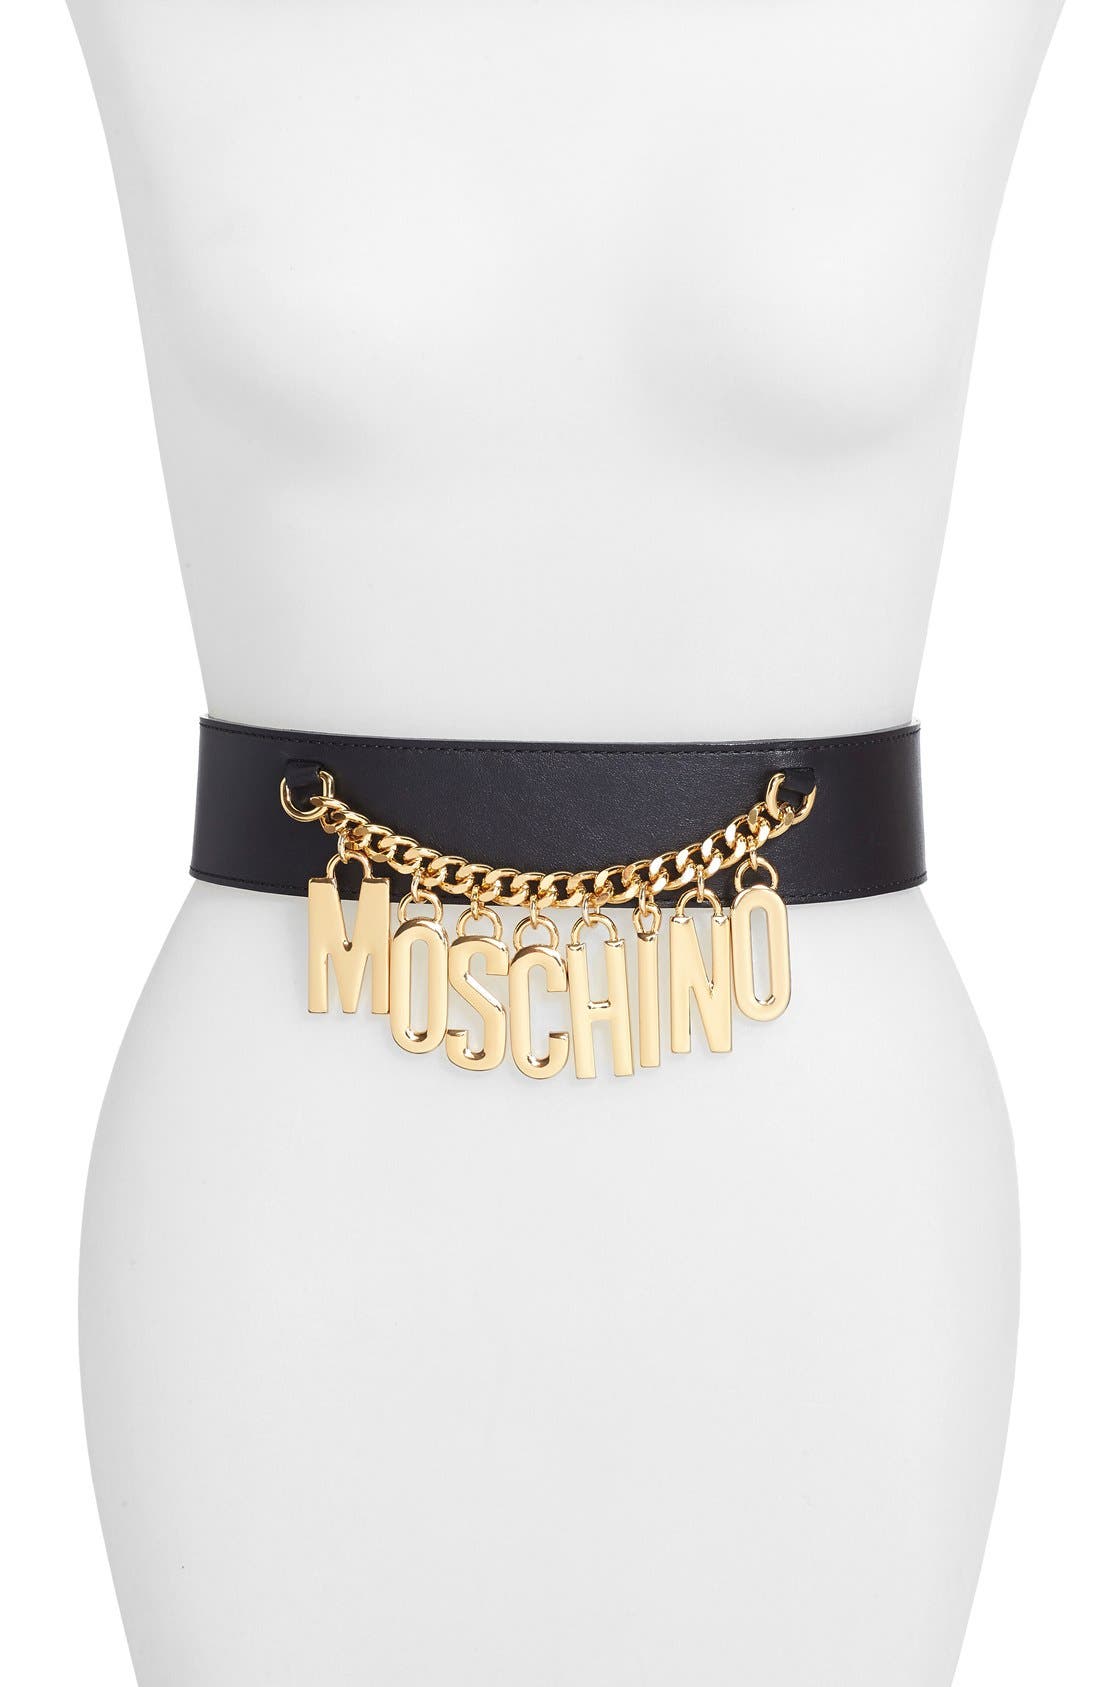 Moschino Leather Chain Belt | Nordstrom